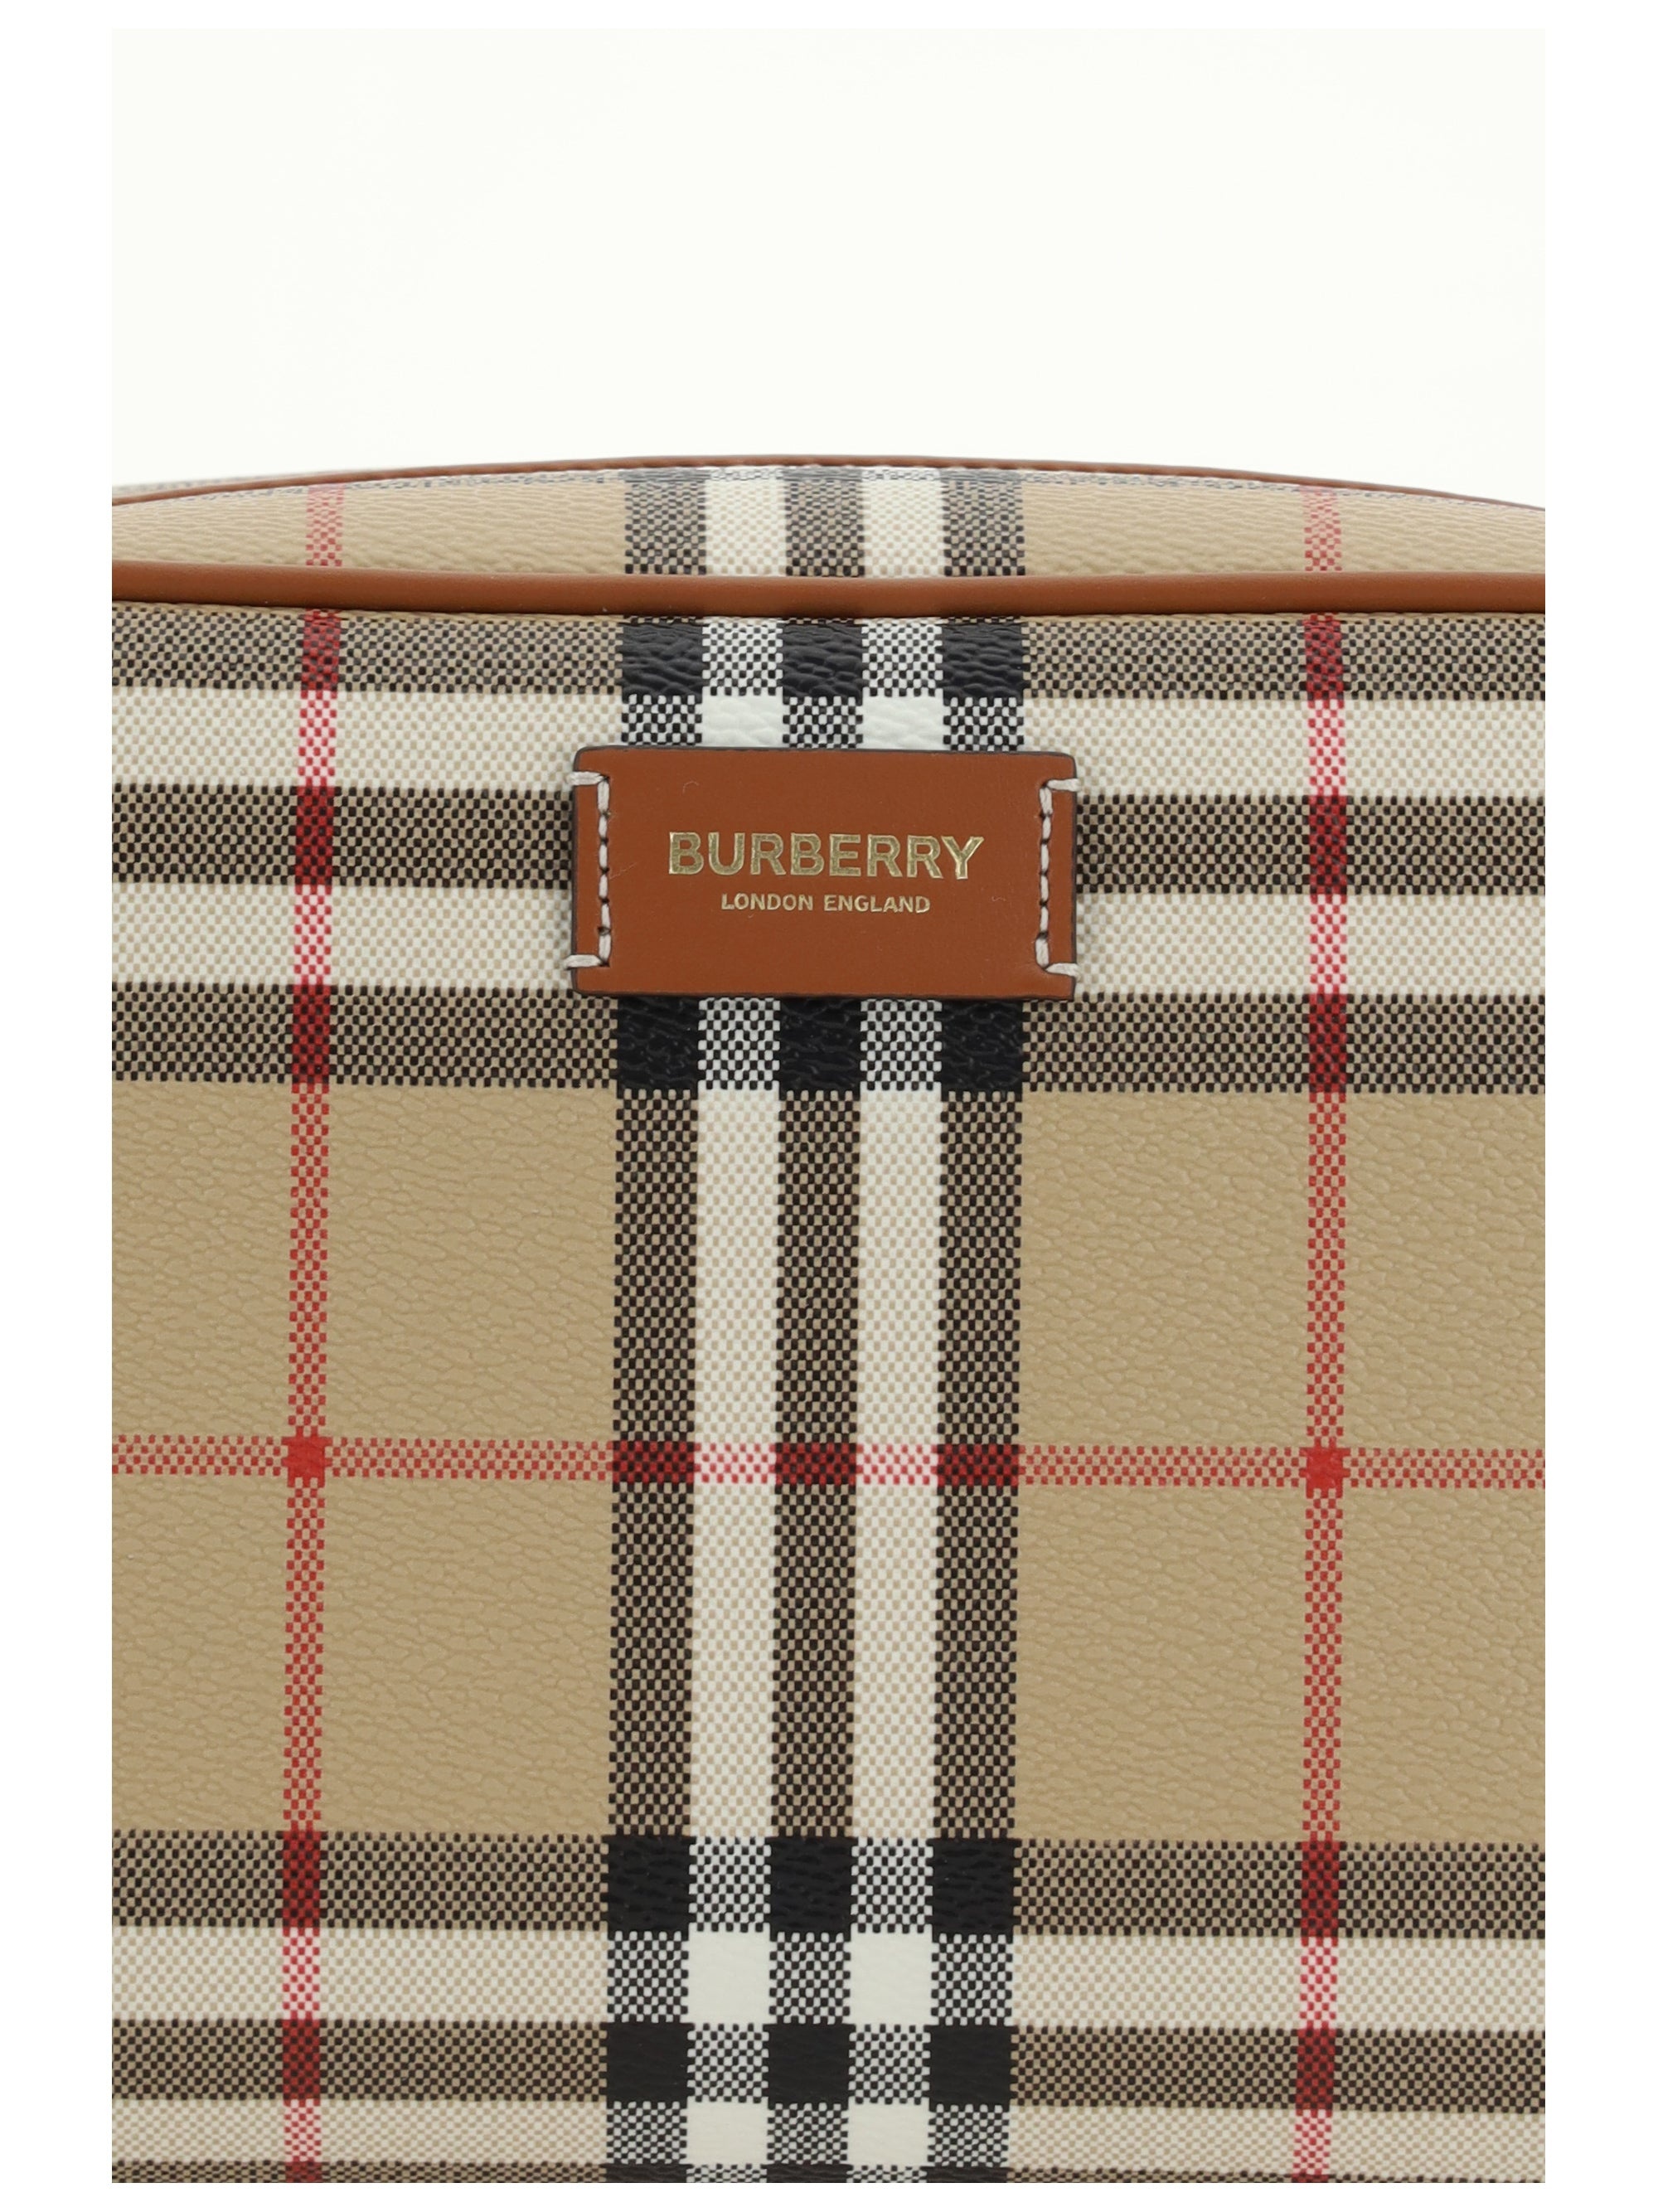 Burberry Women Cosmetic Pouch - 4